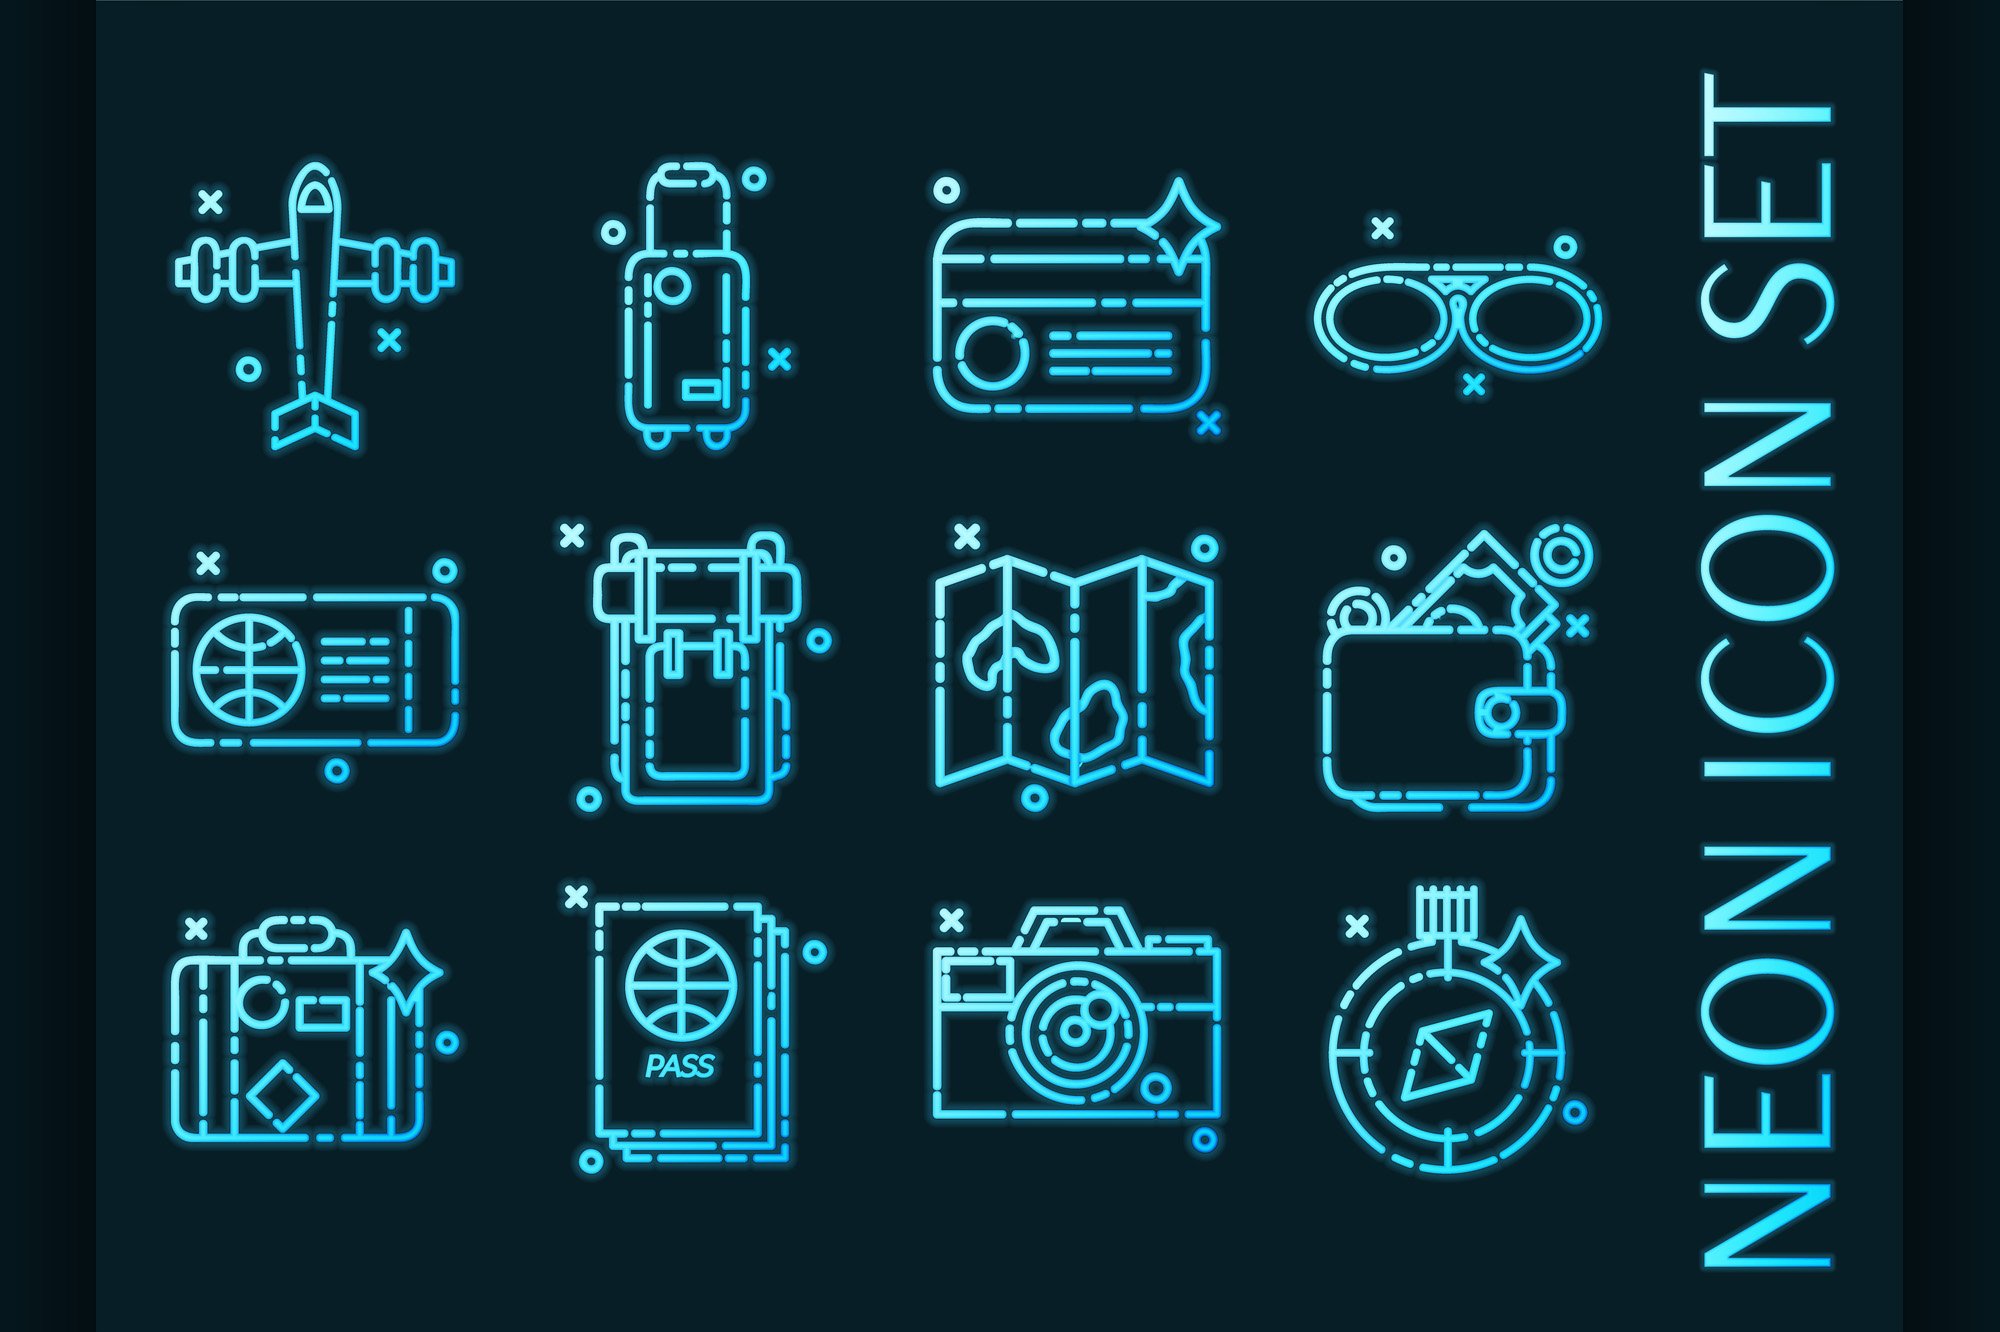 Traveling set icons. Blue glowing cover image.